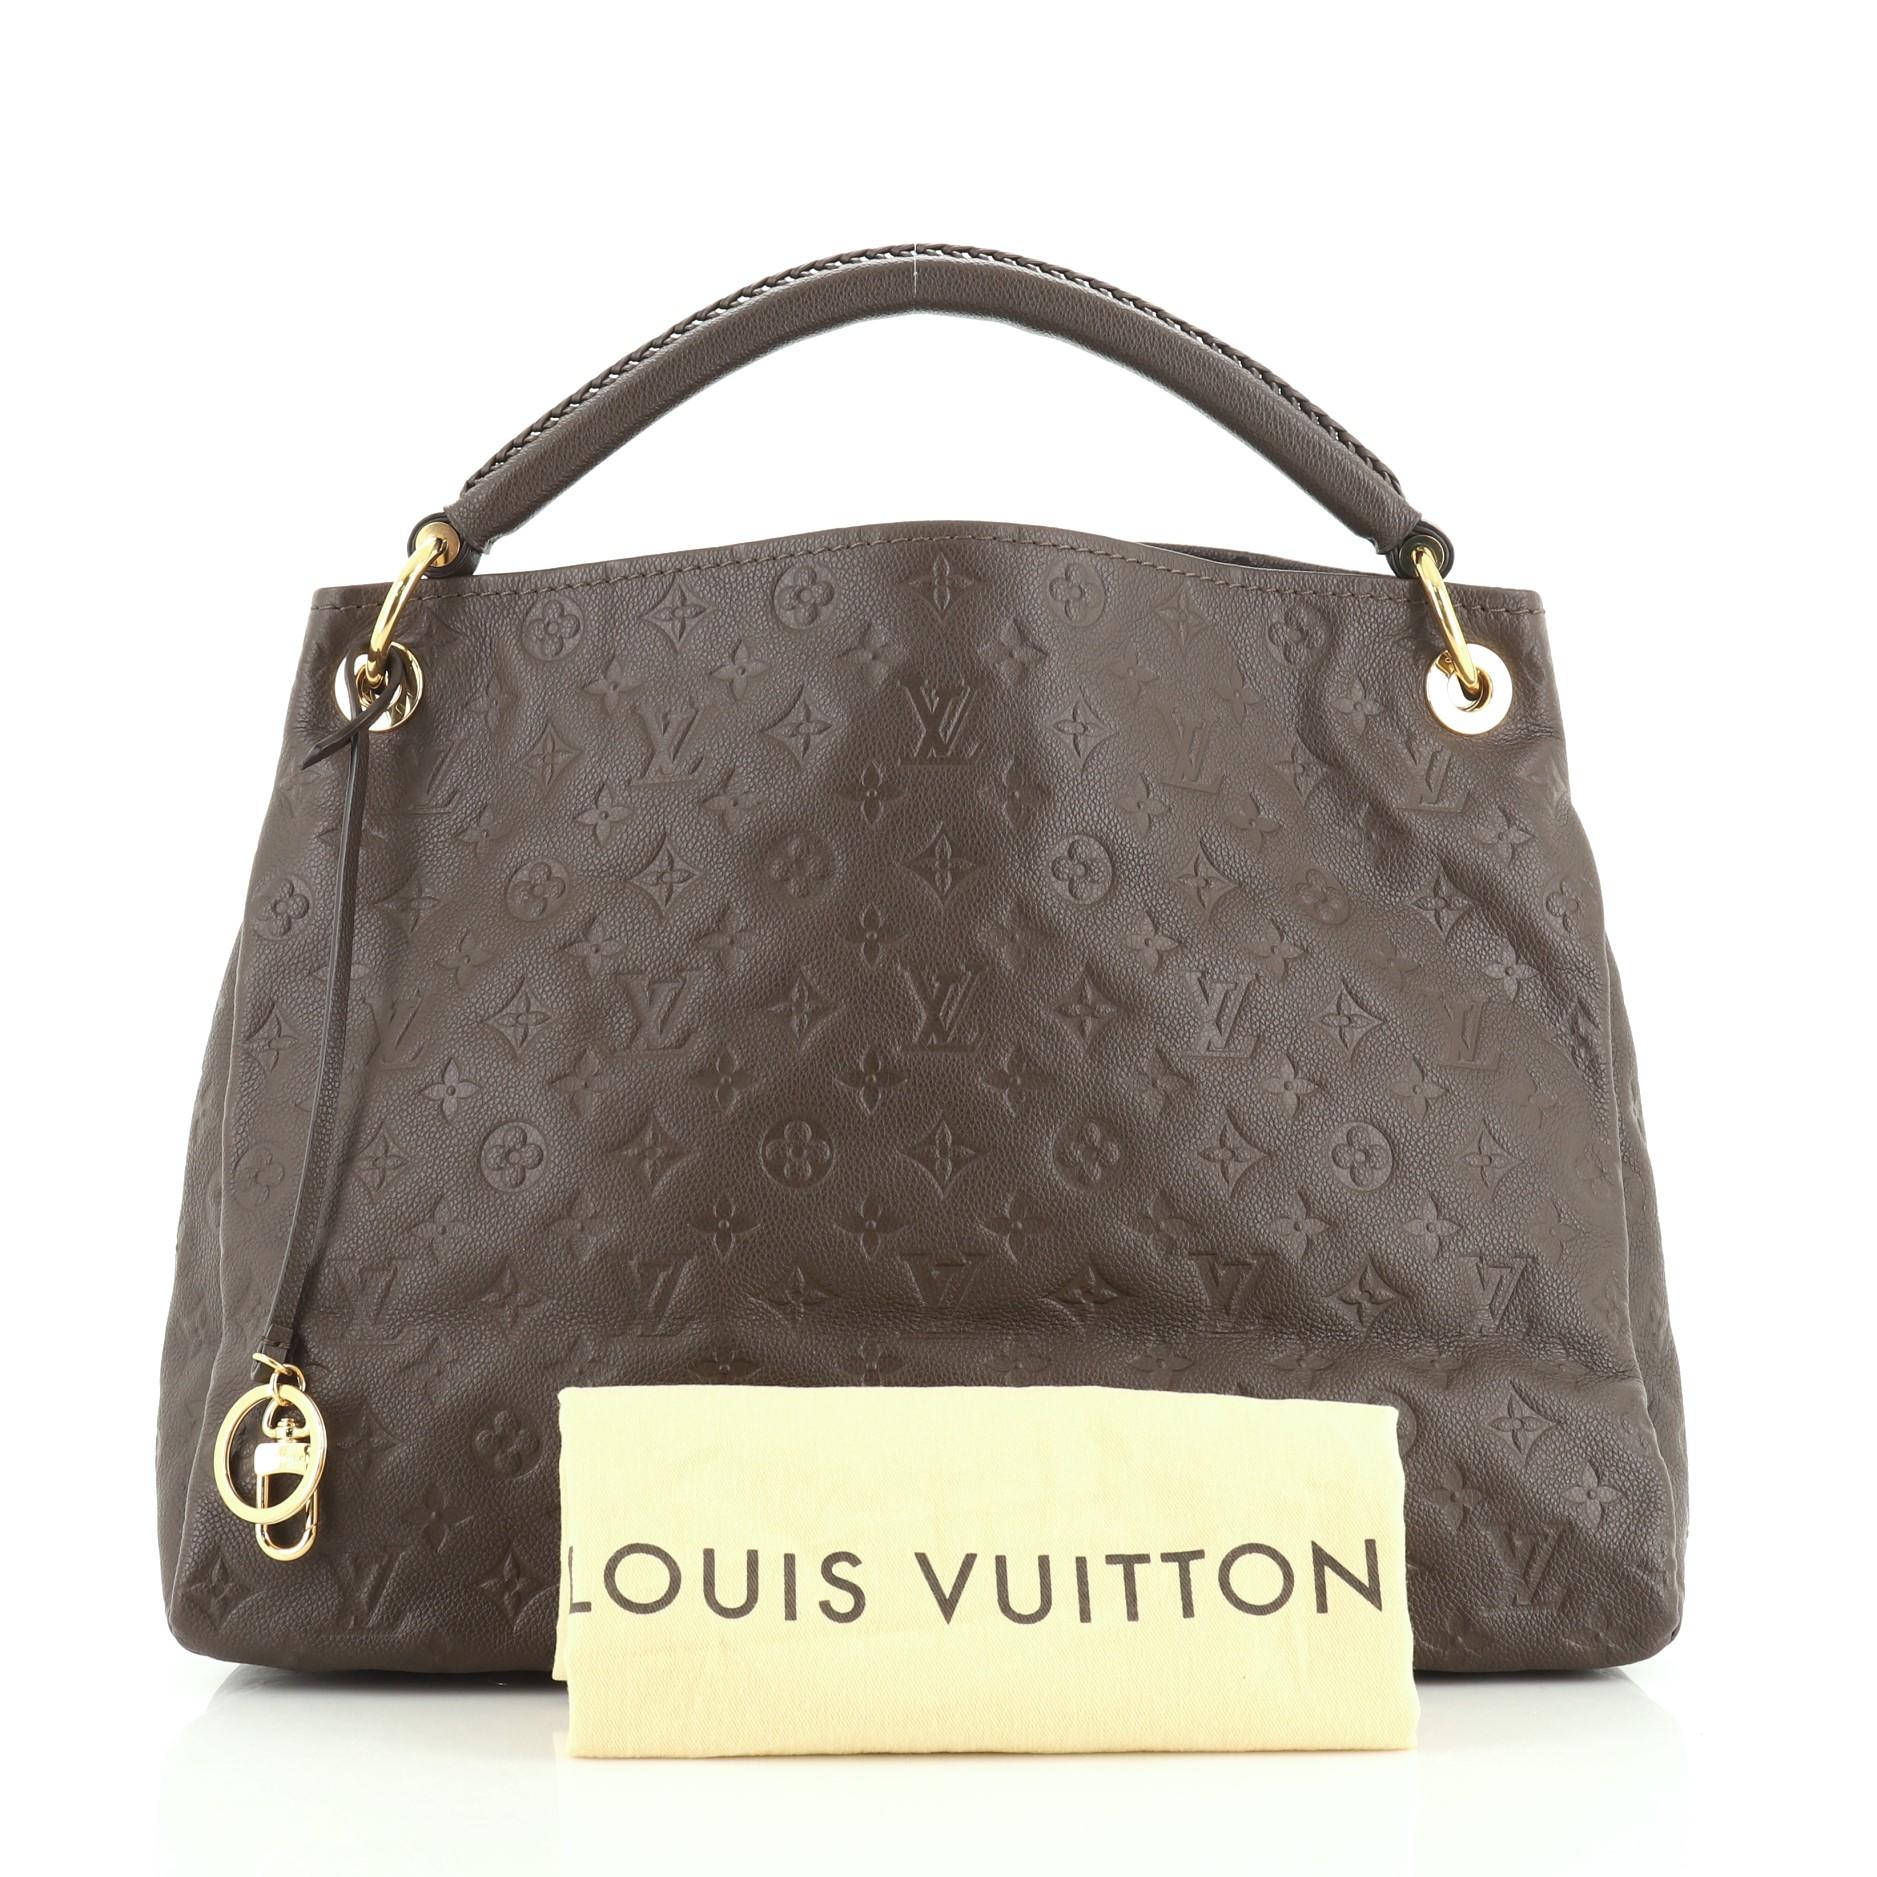 This Louis Vuitton Artsy Handbag Monogram Empreinte Leather MM, crafted from brown monogram empreinte leather, features a single looped braided top handle, protective base studs, and gold-tone hardware. Its wide open top showcases a brown fabric